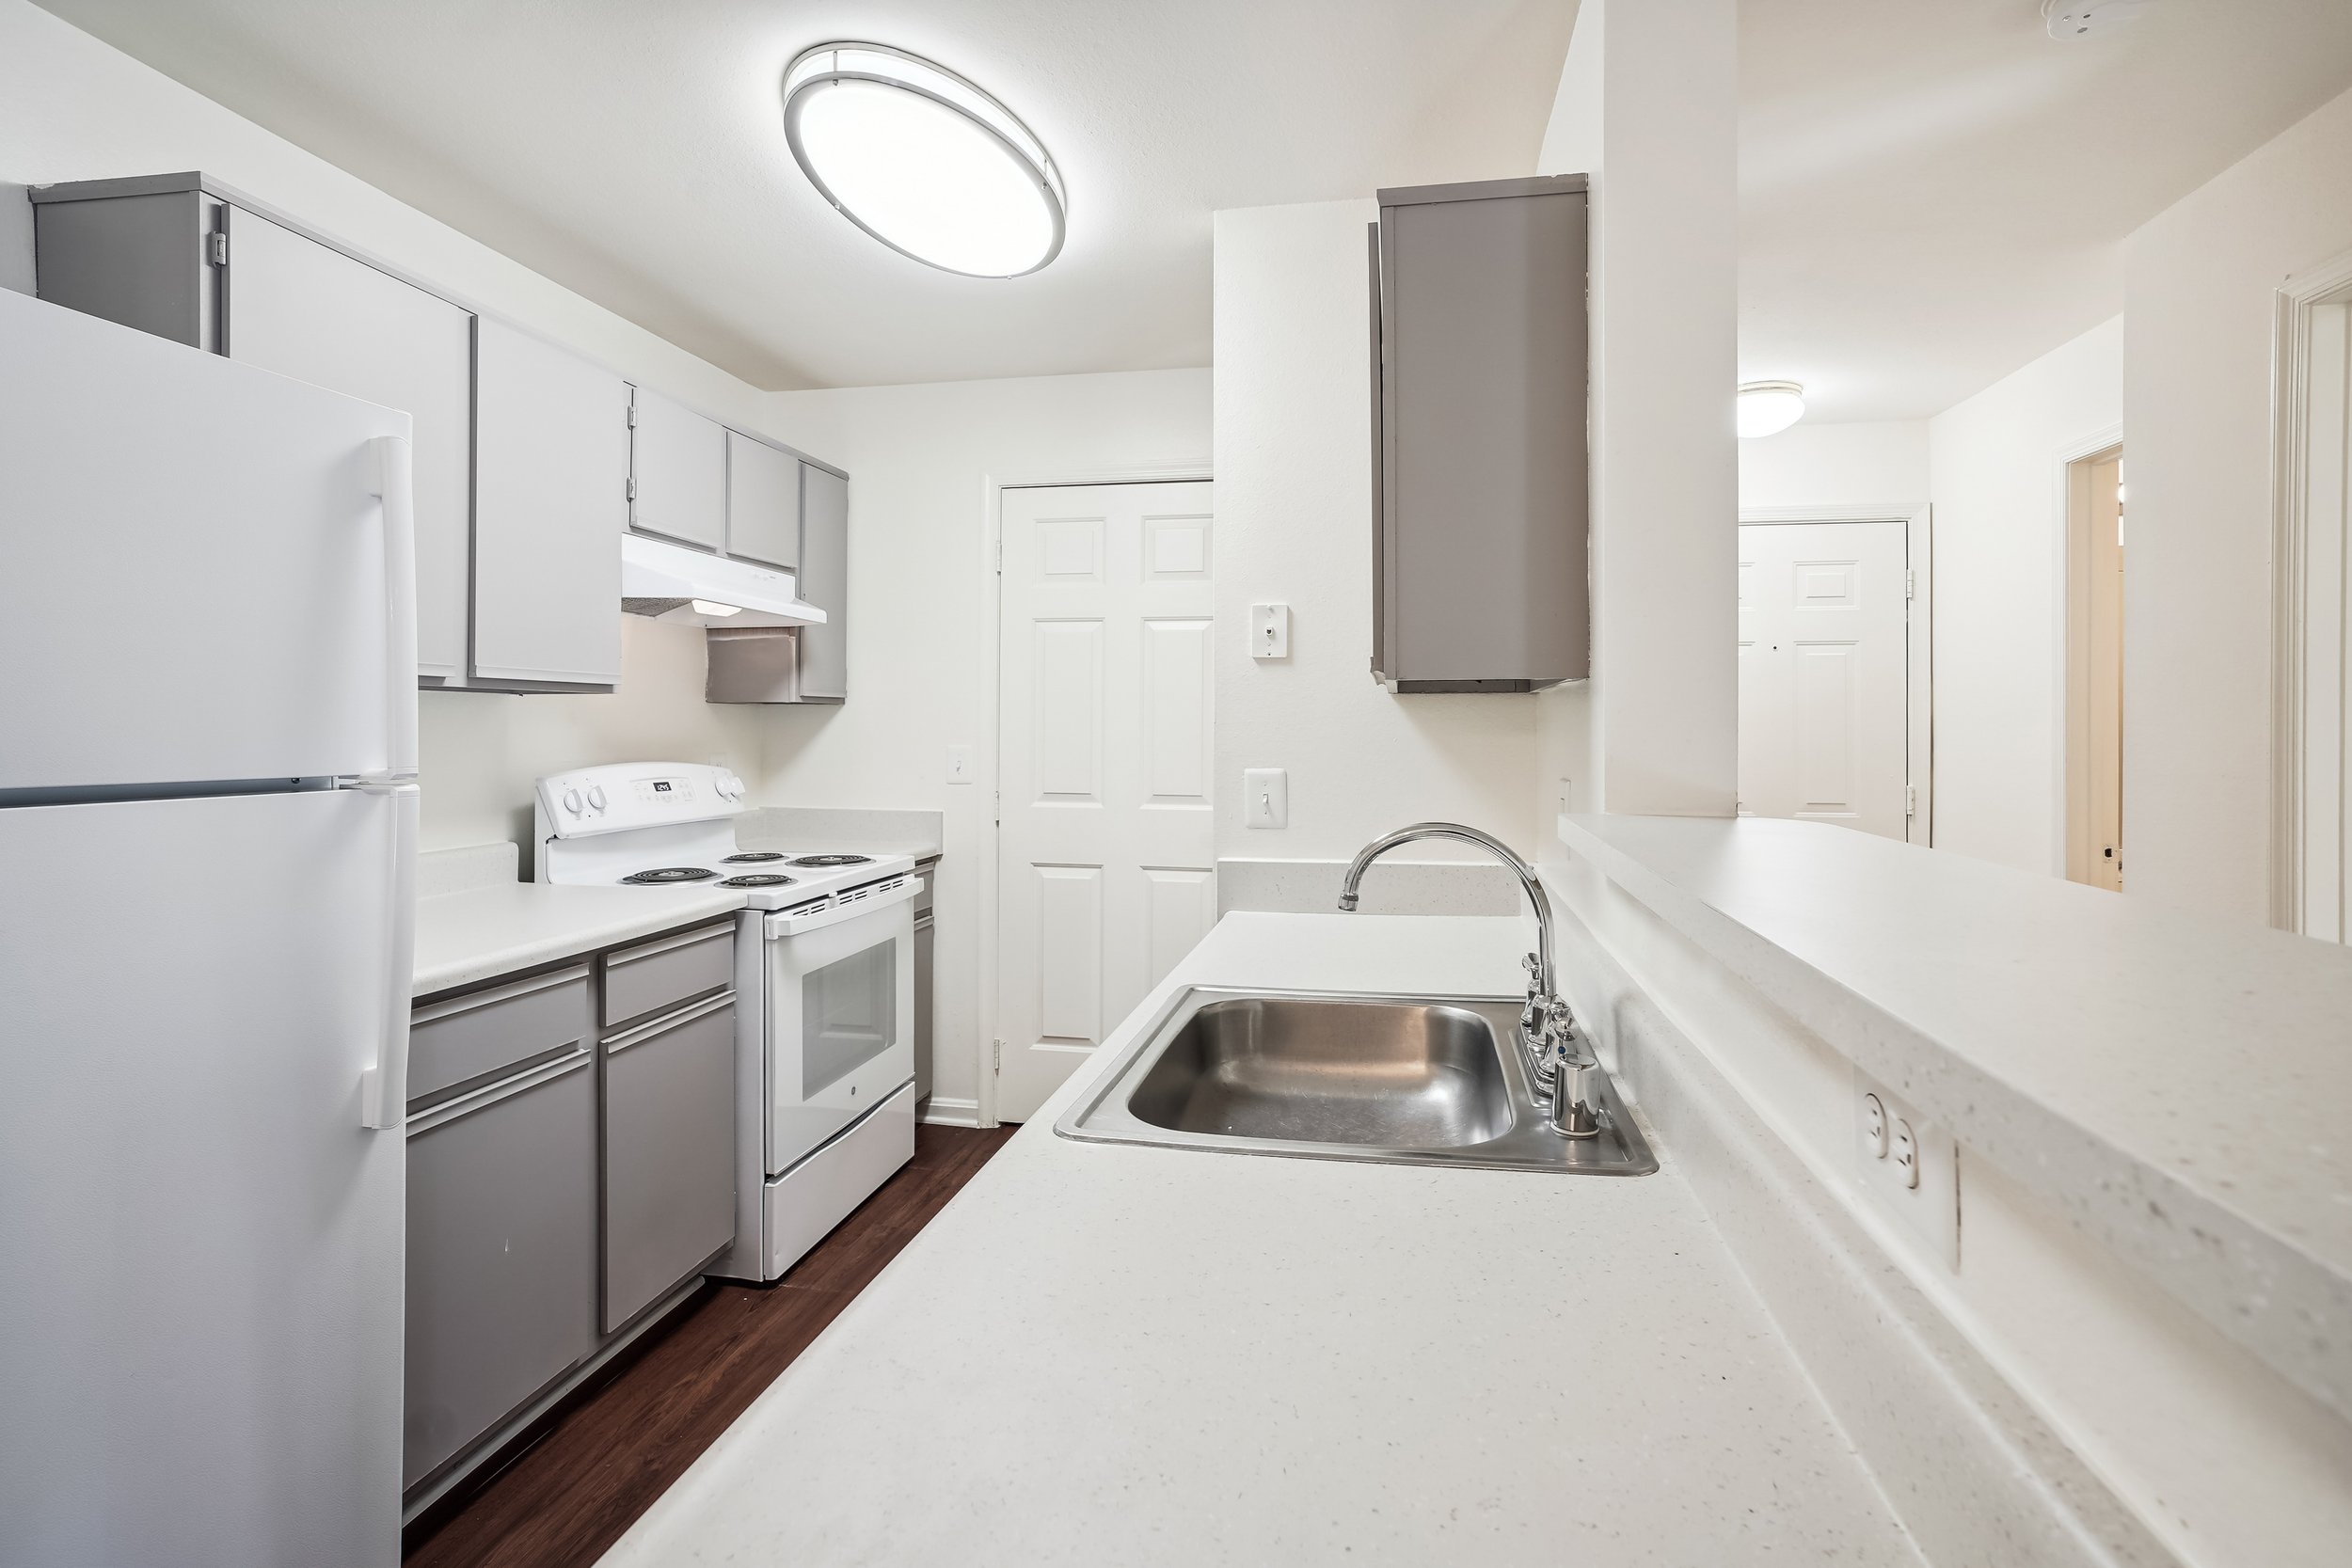  Coppermine Run’s apartment homes offer spacious, updated kitchens. 